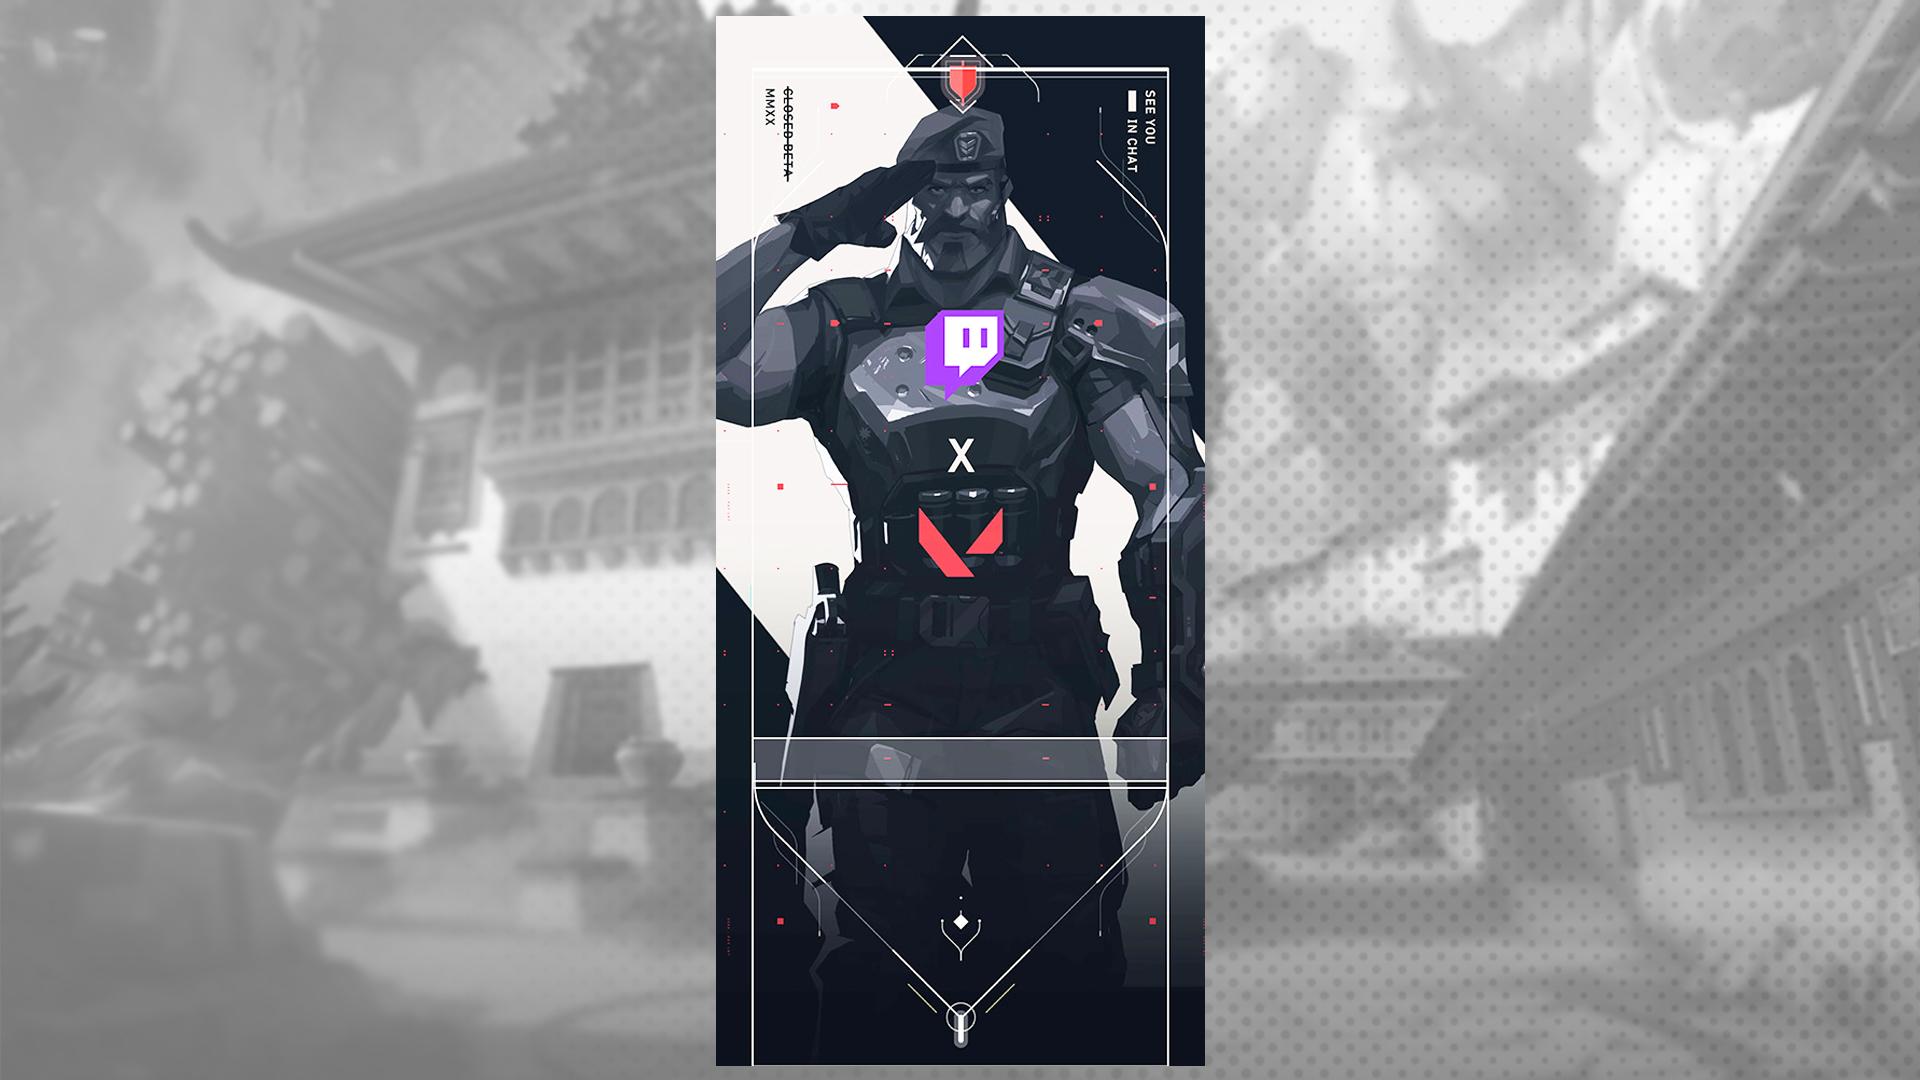 Valorant Twitch player card.